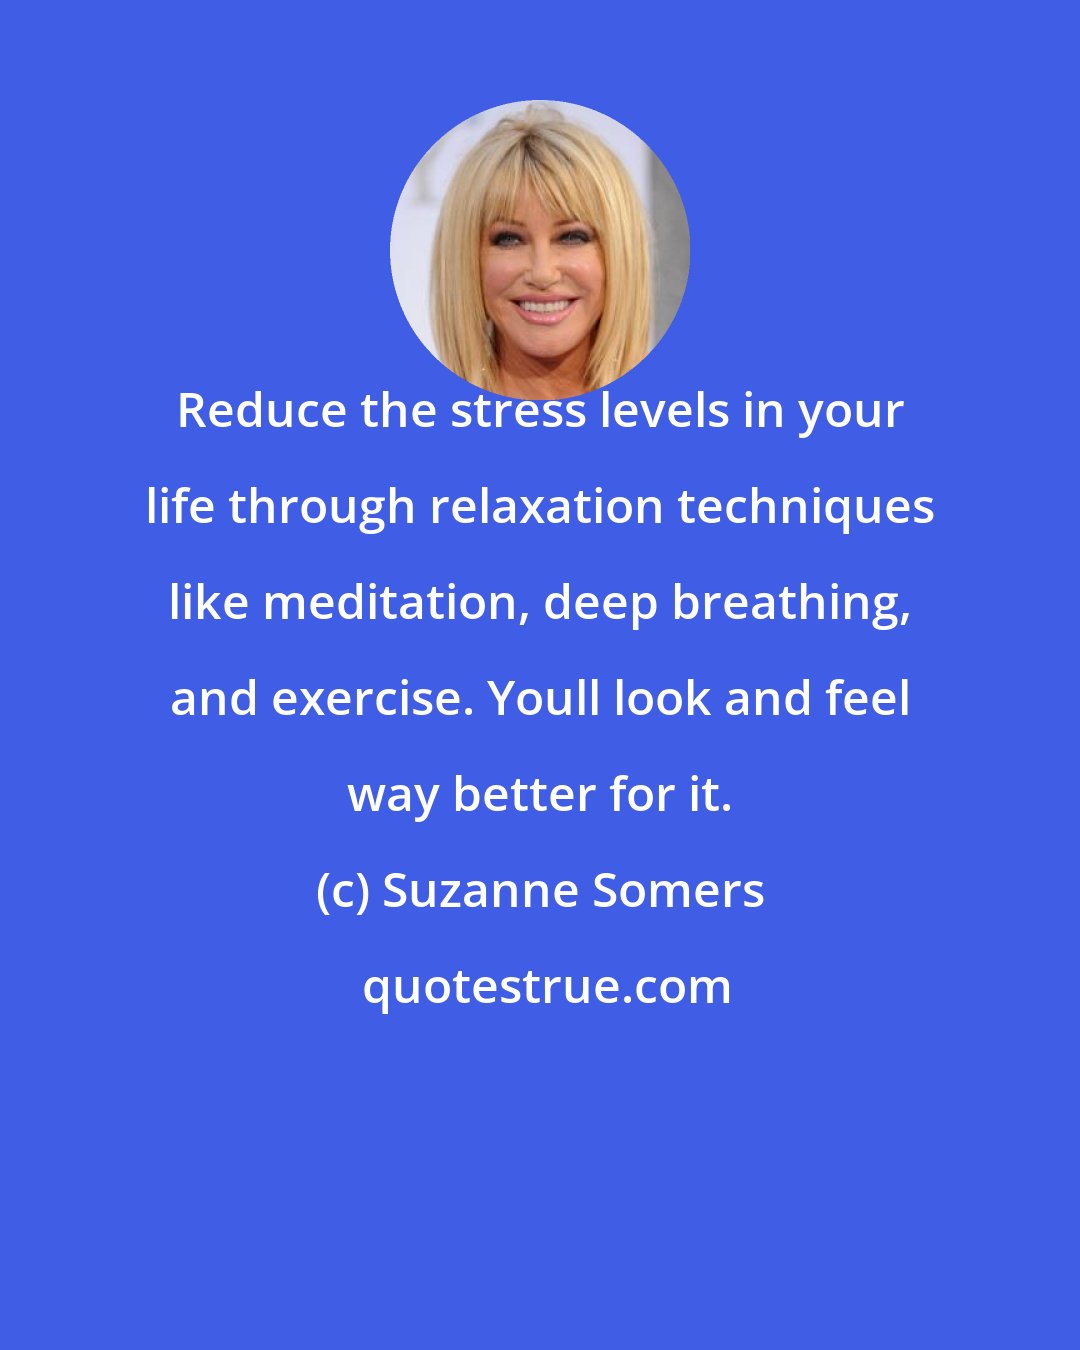 Suzanne Somers: Reduce the stress levels in your life through relaxation techniques like meditation, deep breathing, and exercise. Youll look and feel way better for it.